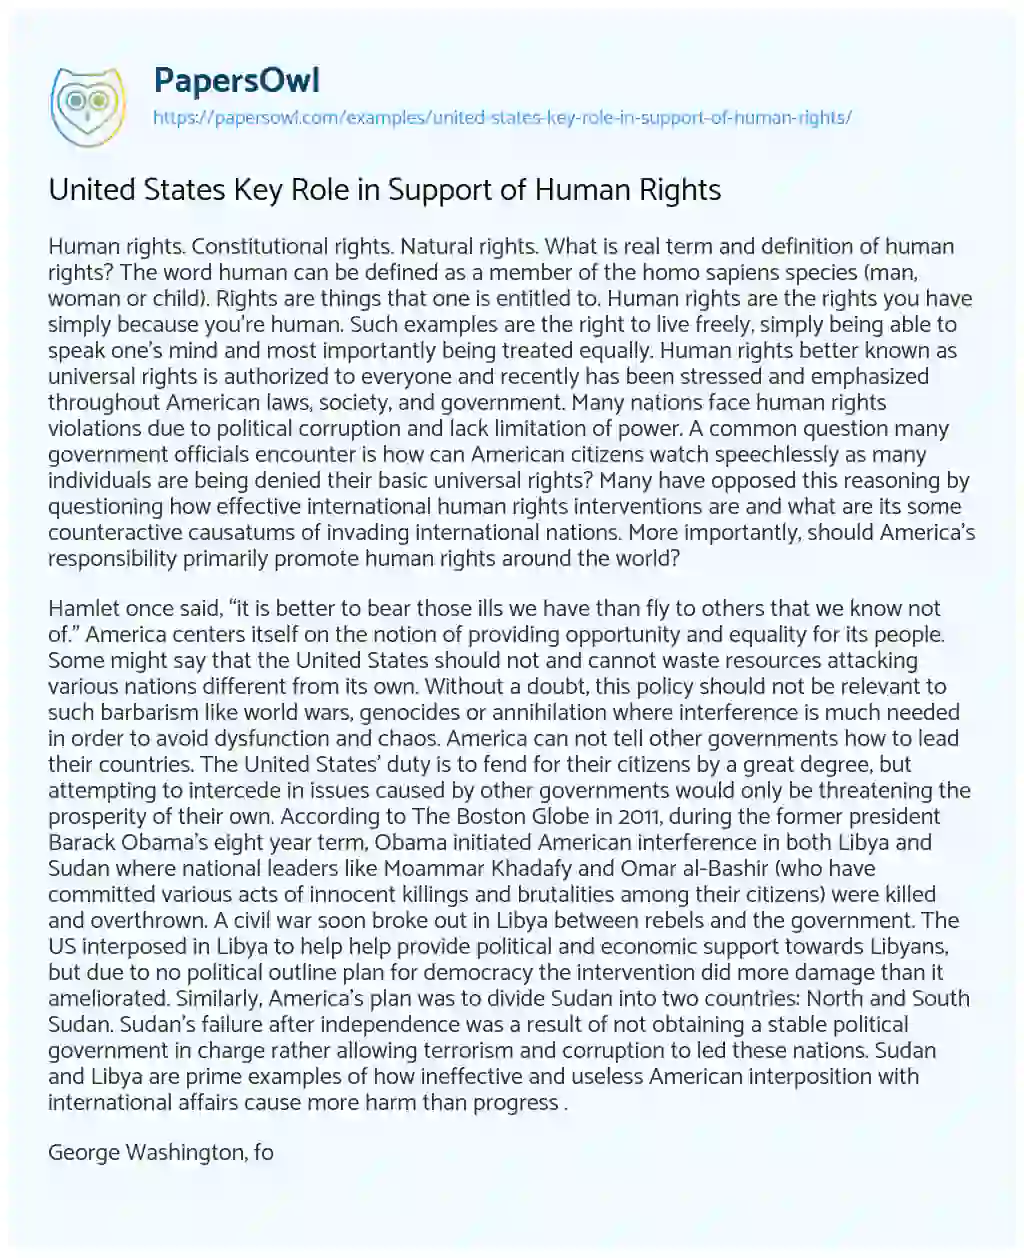 Essay on United States Key Role in Support of Human Rights